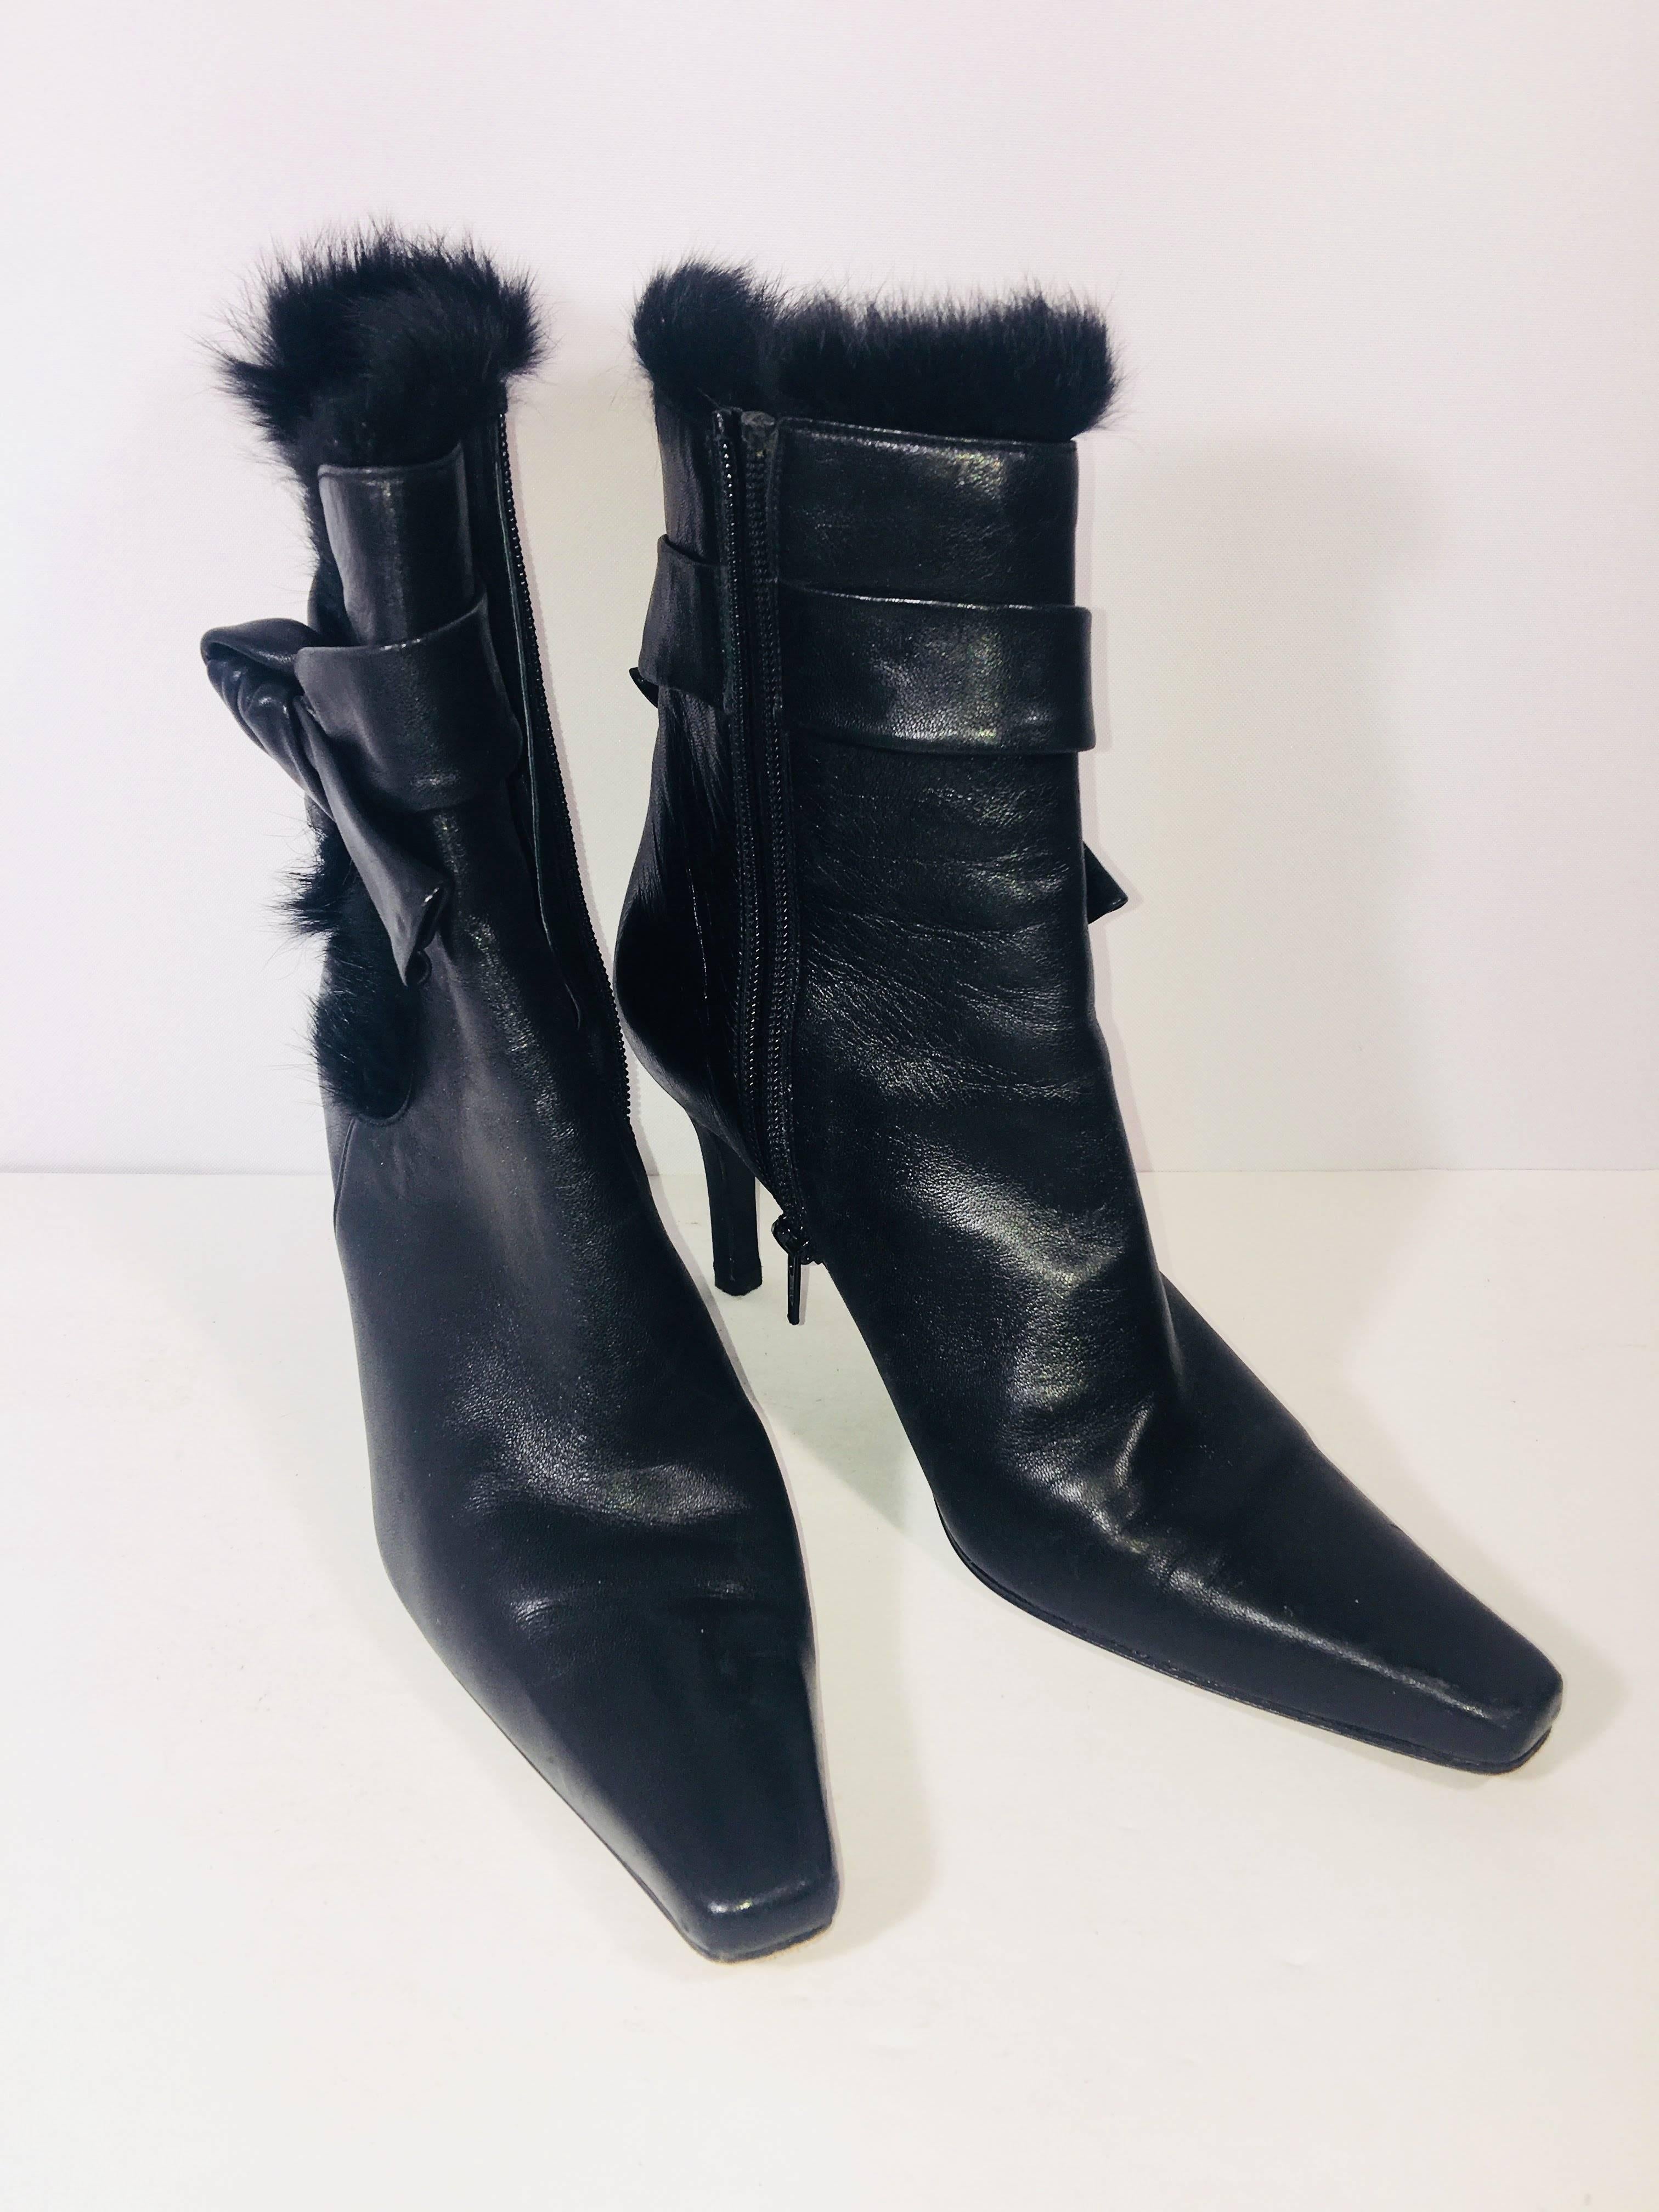 Stuart Weitzman Black Leather Ankle Boots with Bow Detail and Fur Around Ankle and Side Zipper.